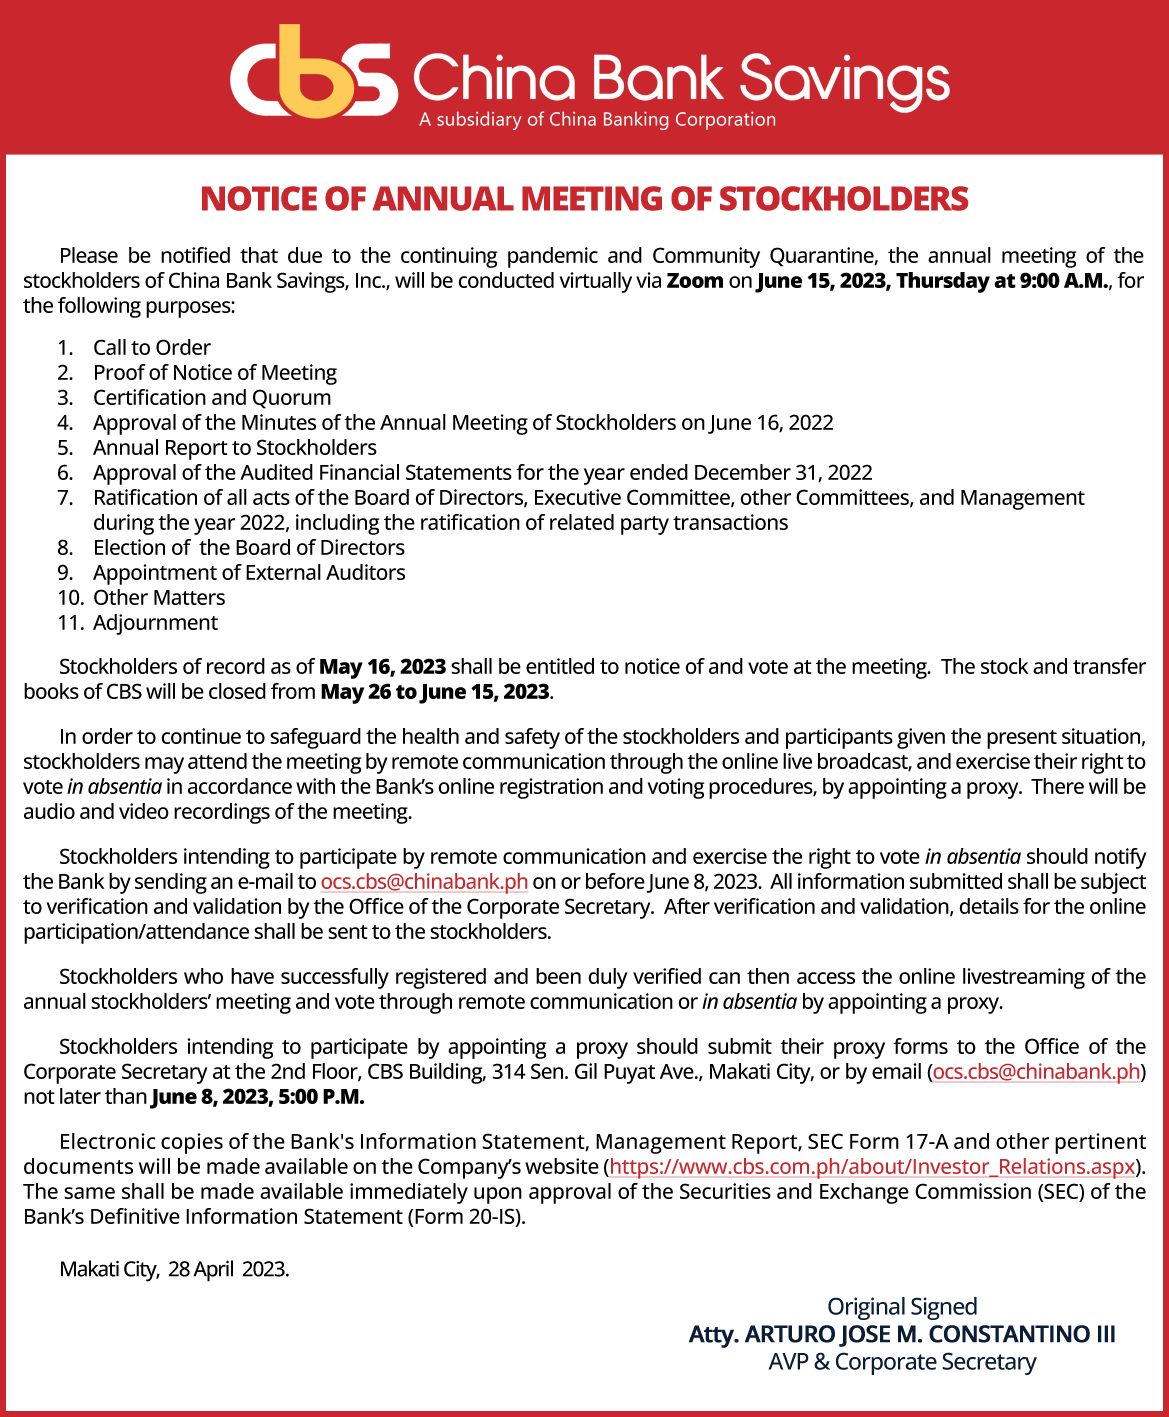 Notice of Annual Meeting of Stockholders